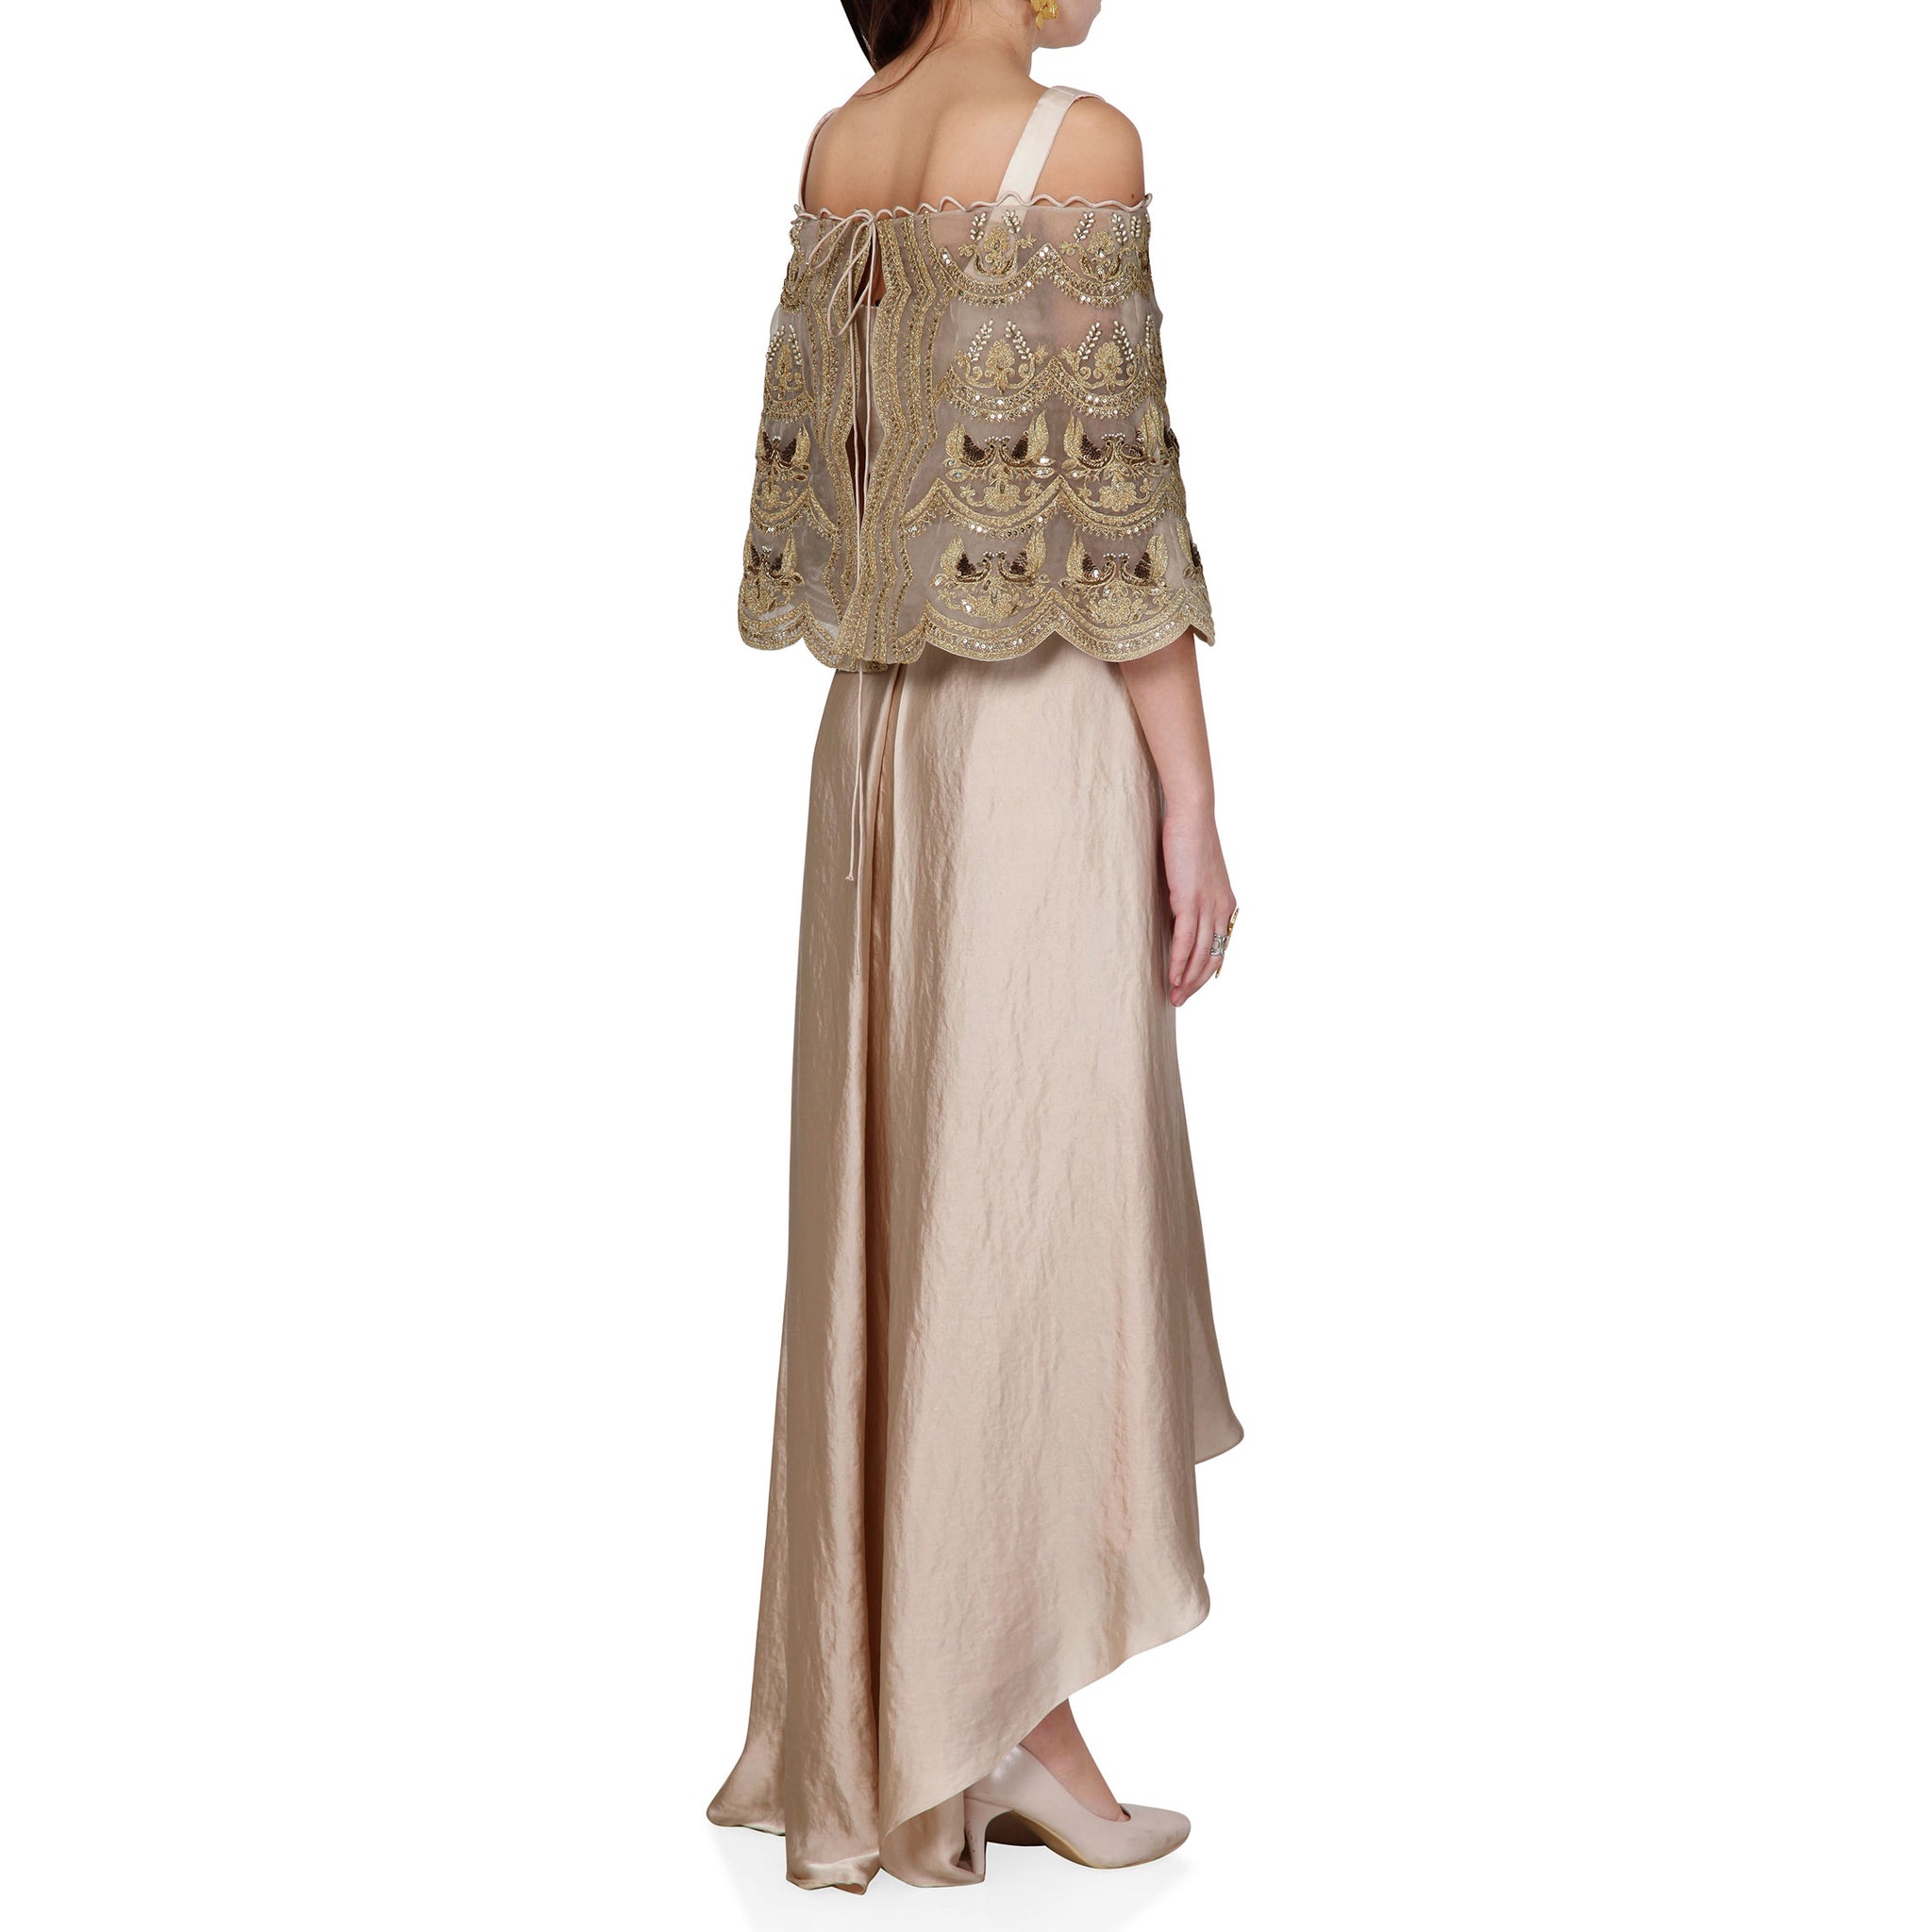 Embroidered Cape with Blouse and Draped Skirt